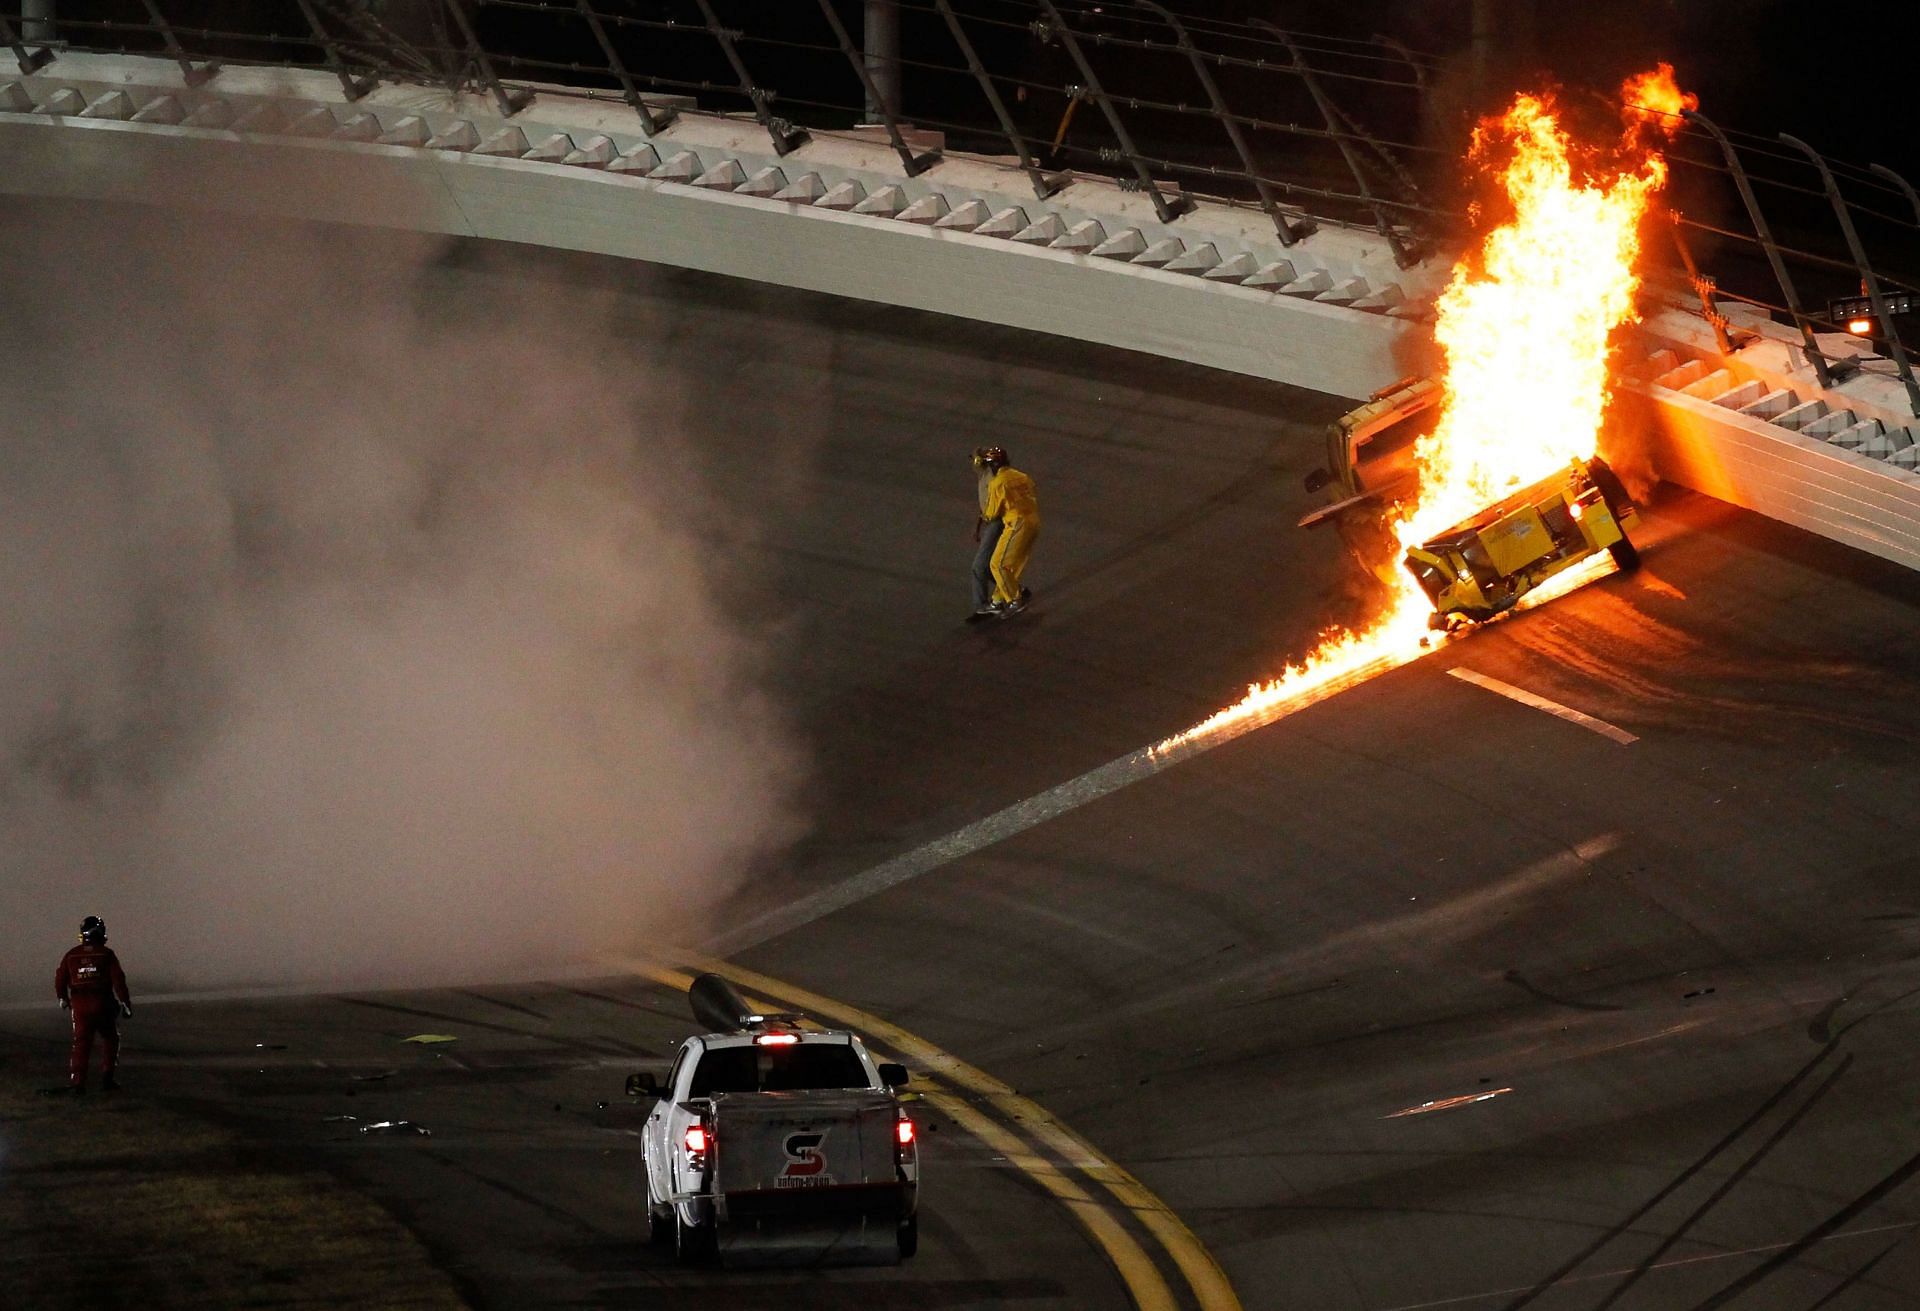 The jet dryer bursts into flames after Montoya crashes into it under caution at the 2012 Daytona 500 (Photo by Jonathan Ferrey/Getty Images for NASCAR)